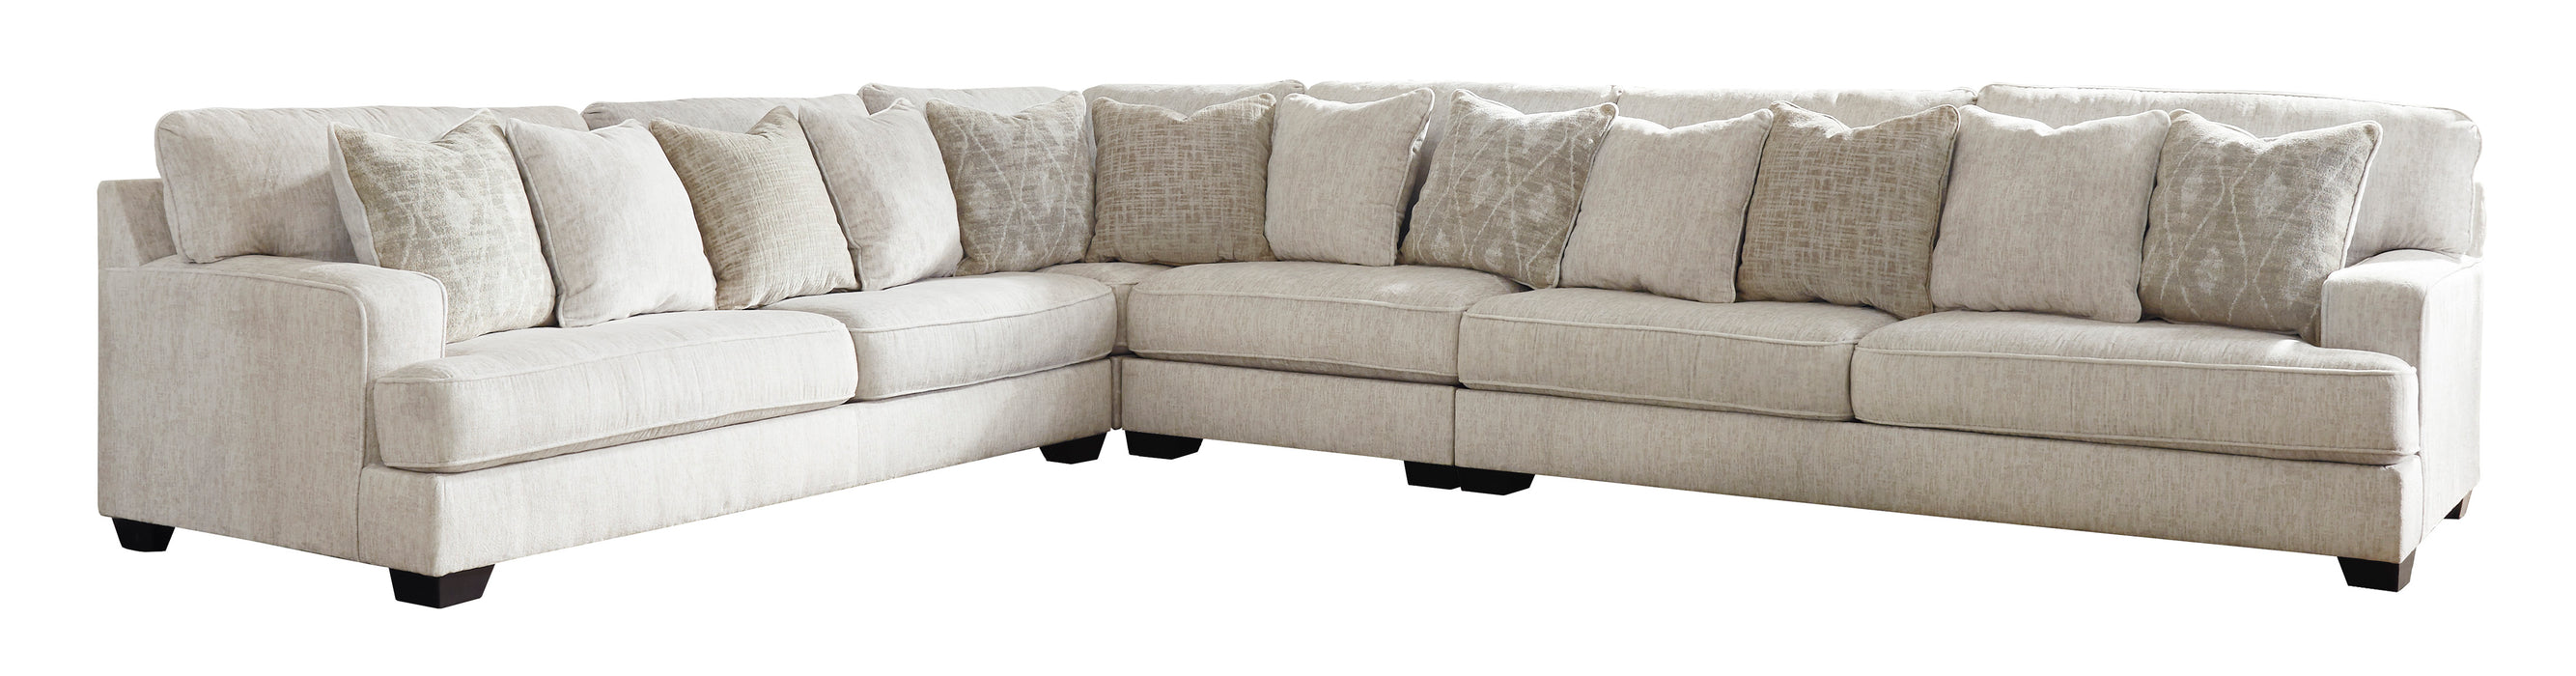 Rawcliffe 4-Piece Sectional Sofa